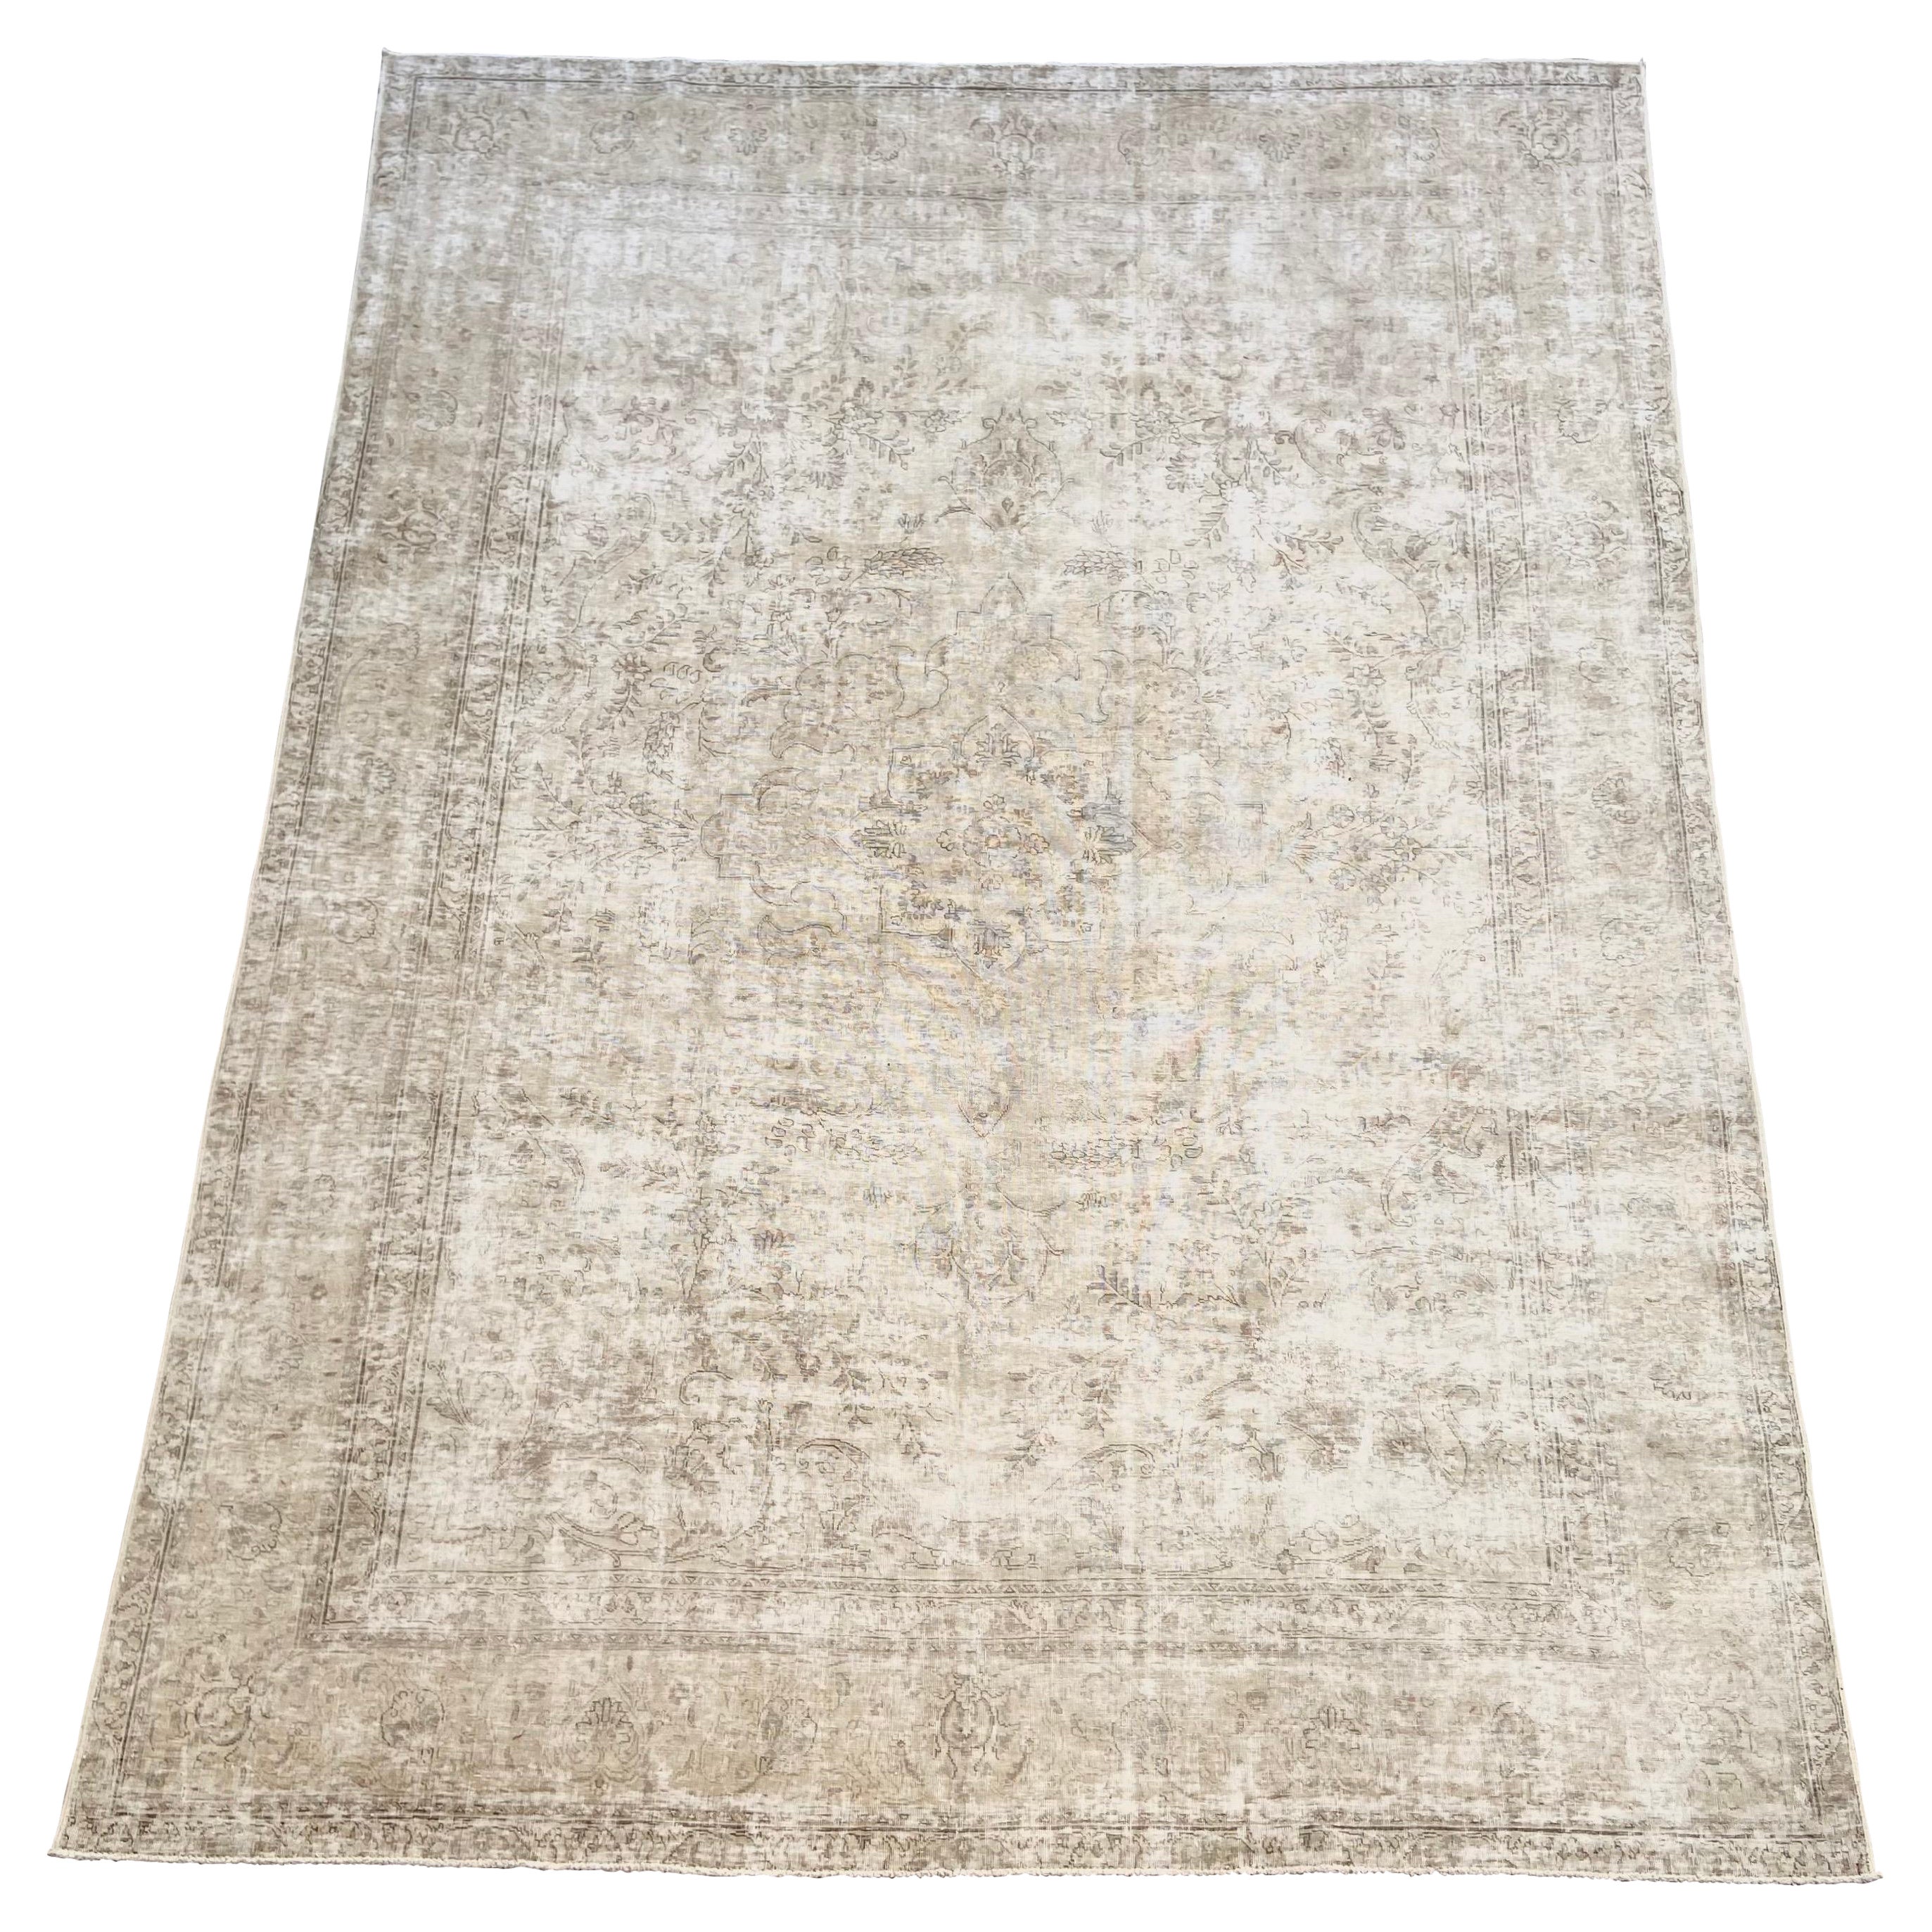 Vintage Turkish Wool Flat Weave Rug in Warm Browns Taupes and Creams For Sale